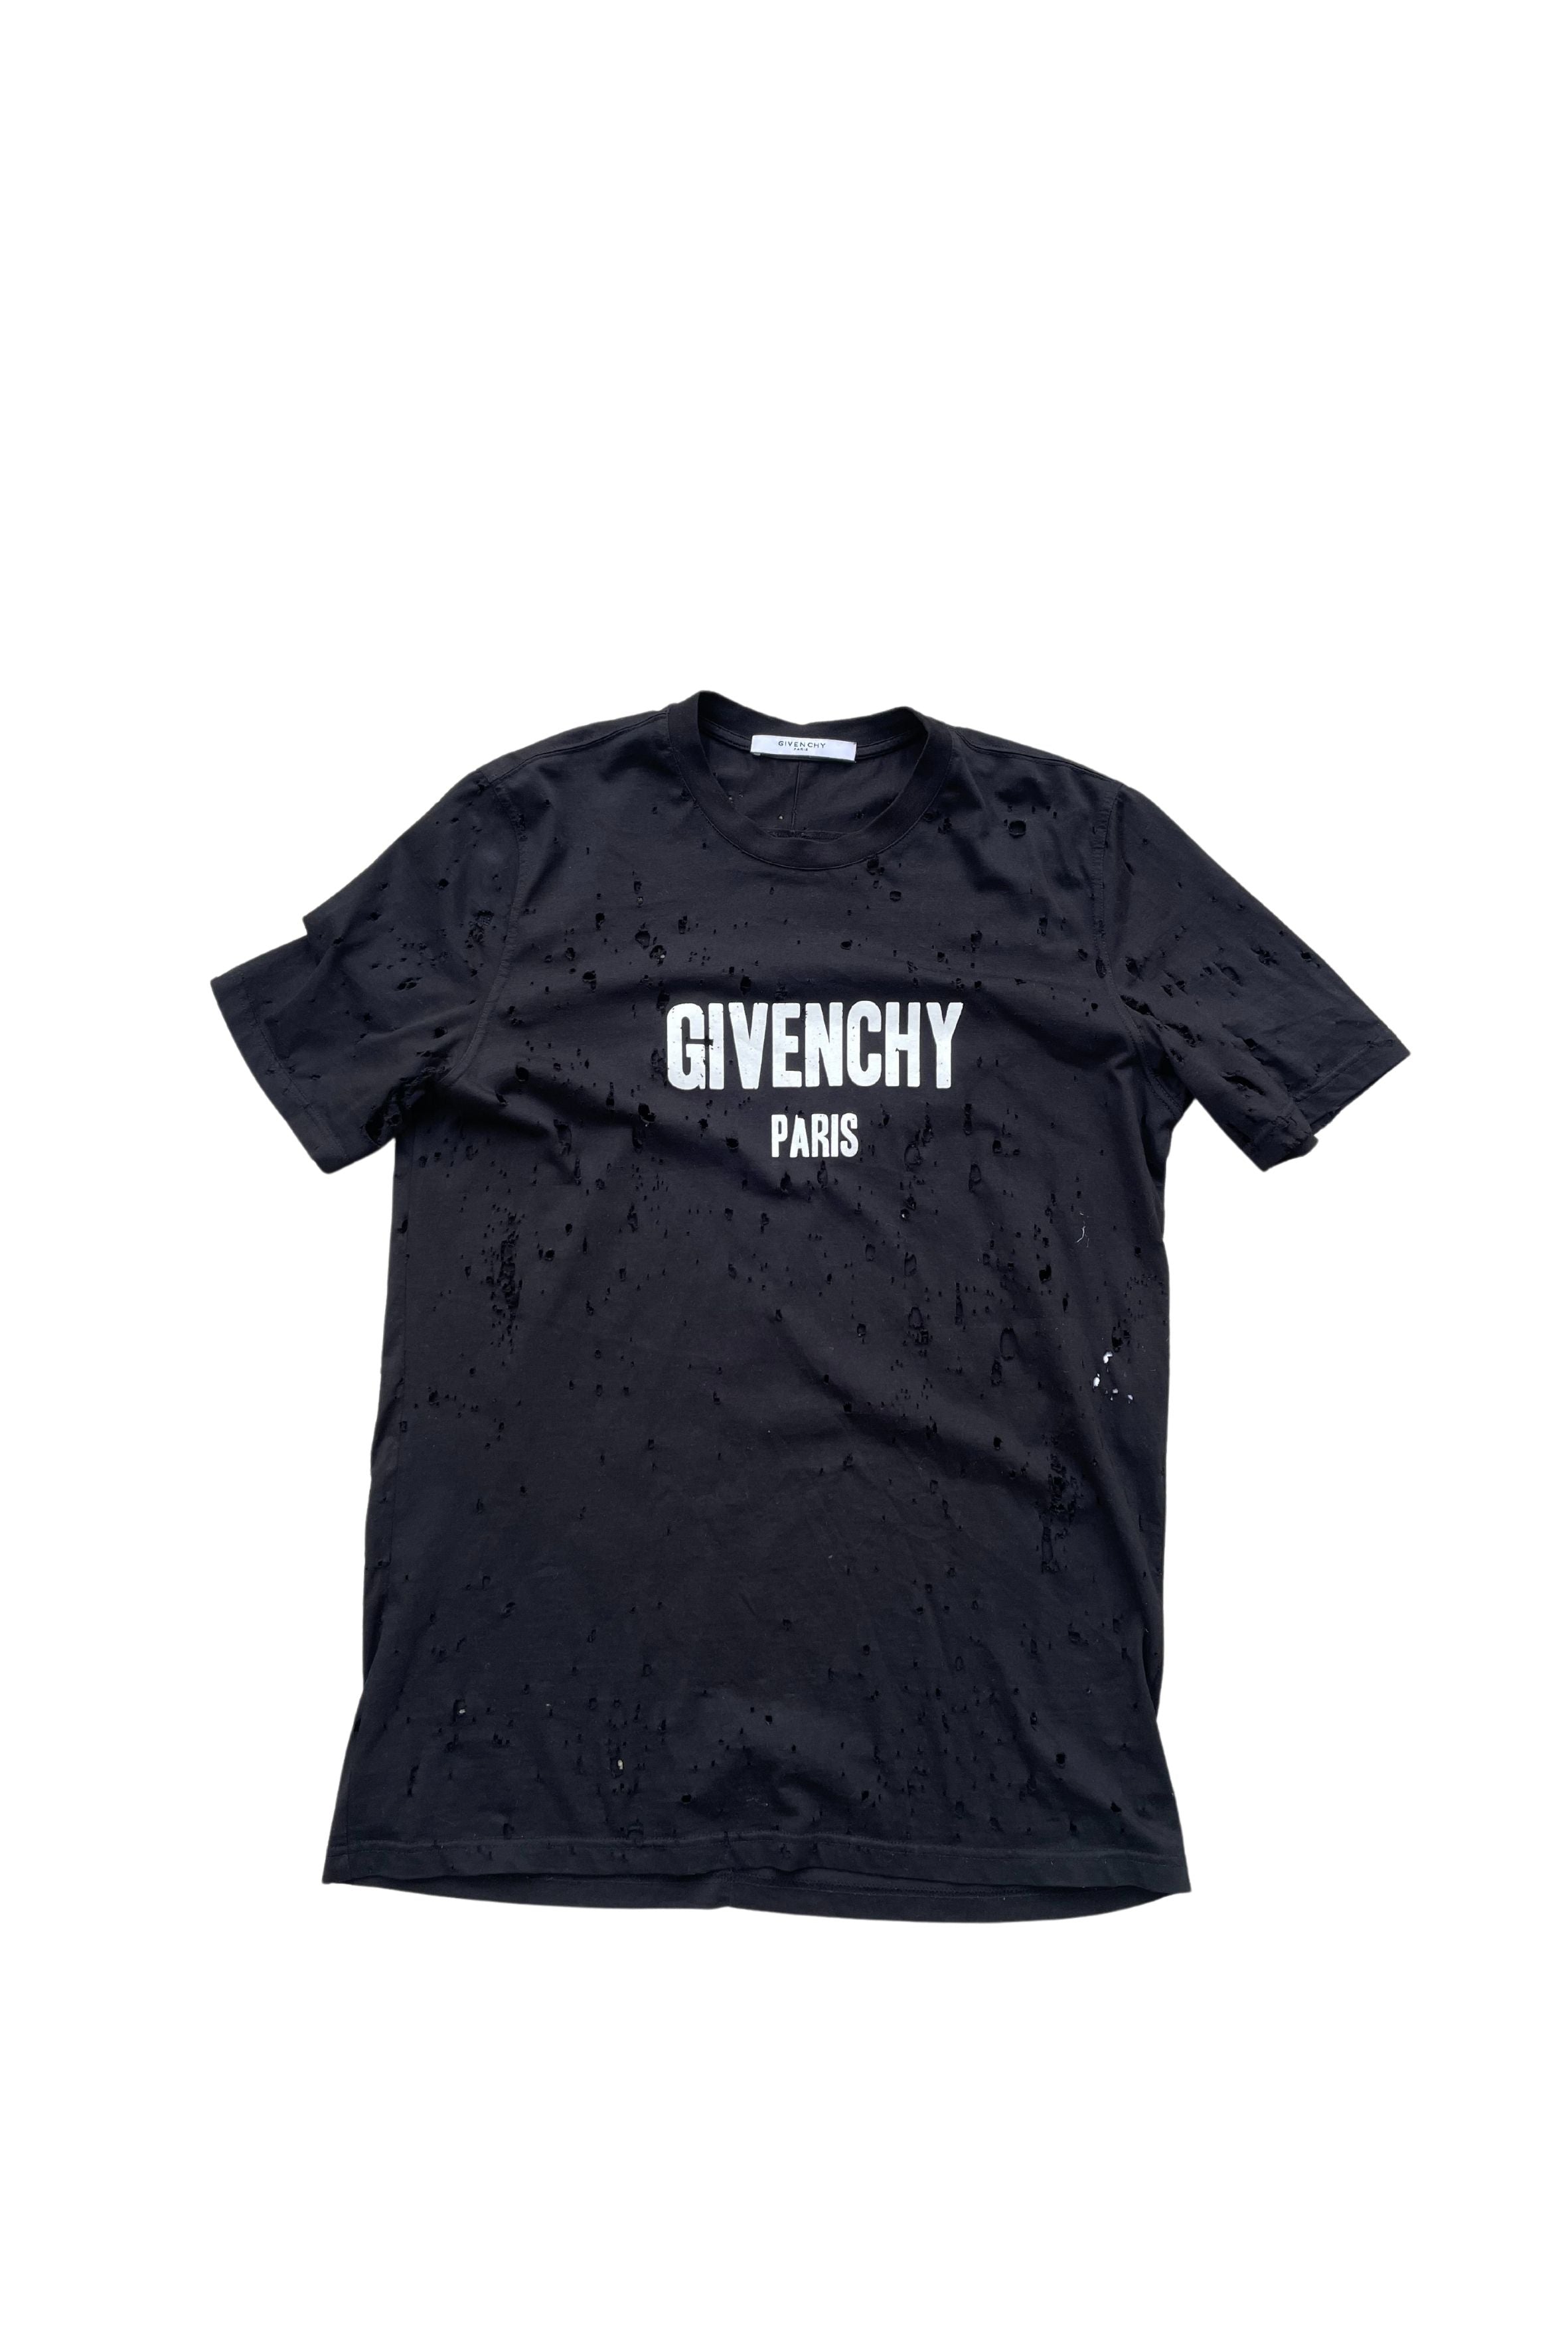 Givenchy Logo-Print Distressed Cotton T-Shirt in Black Size S